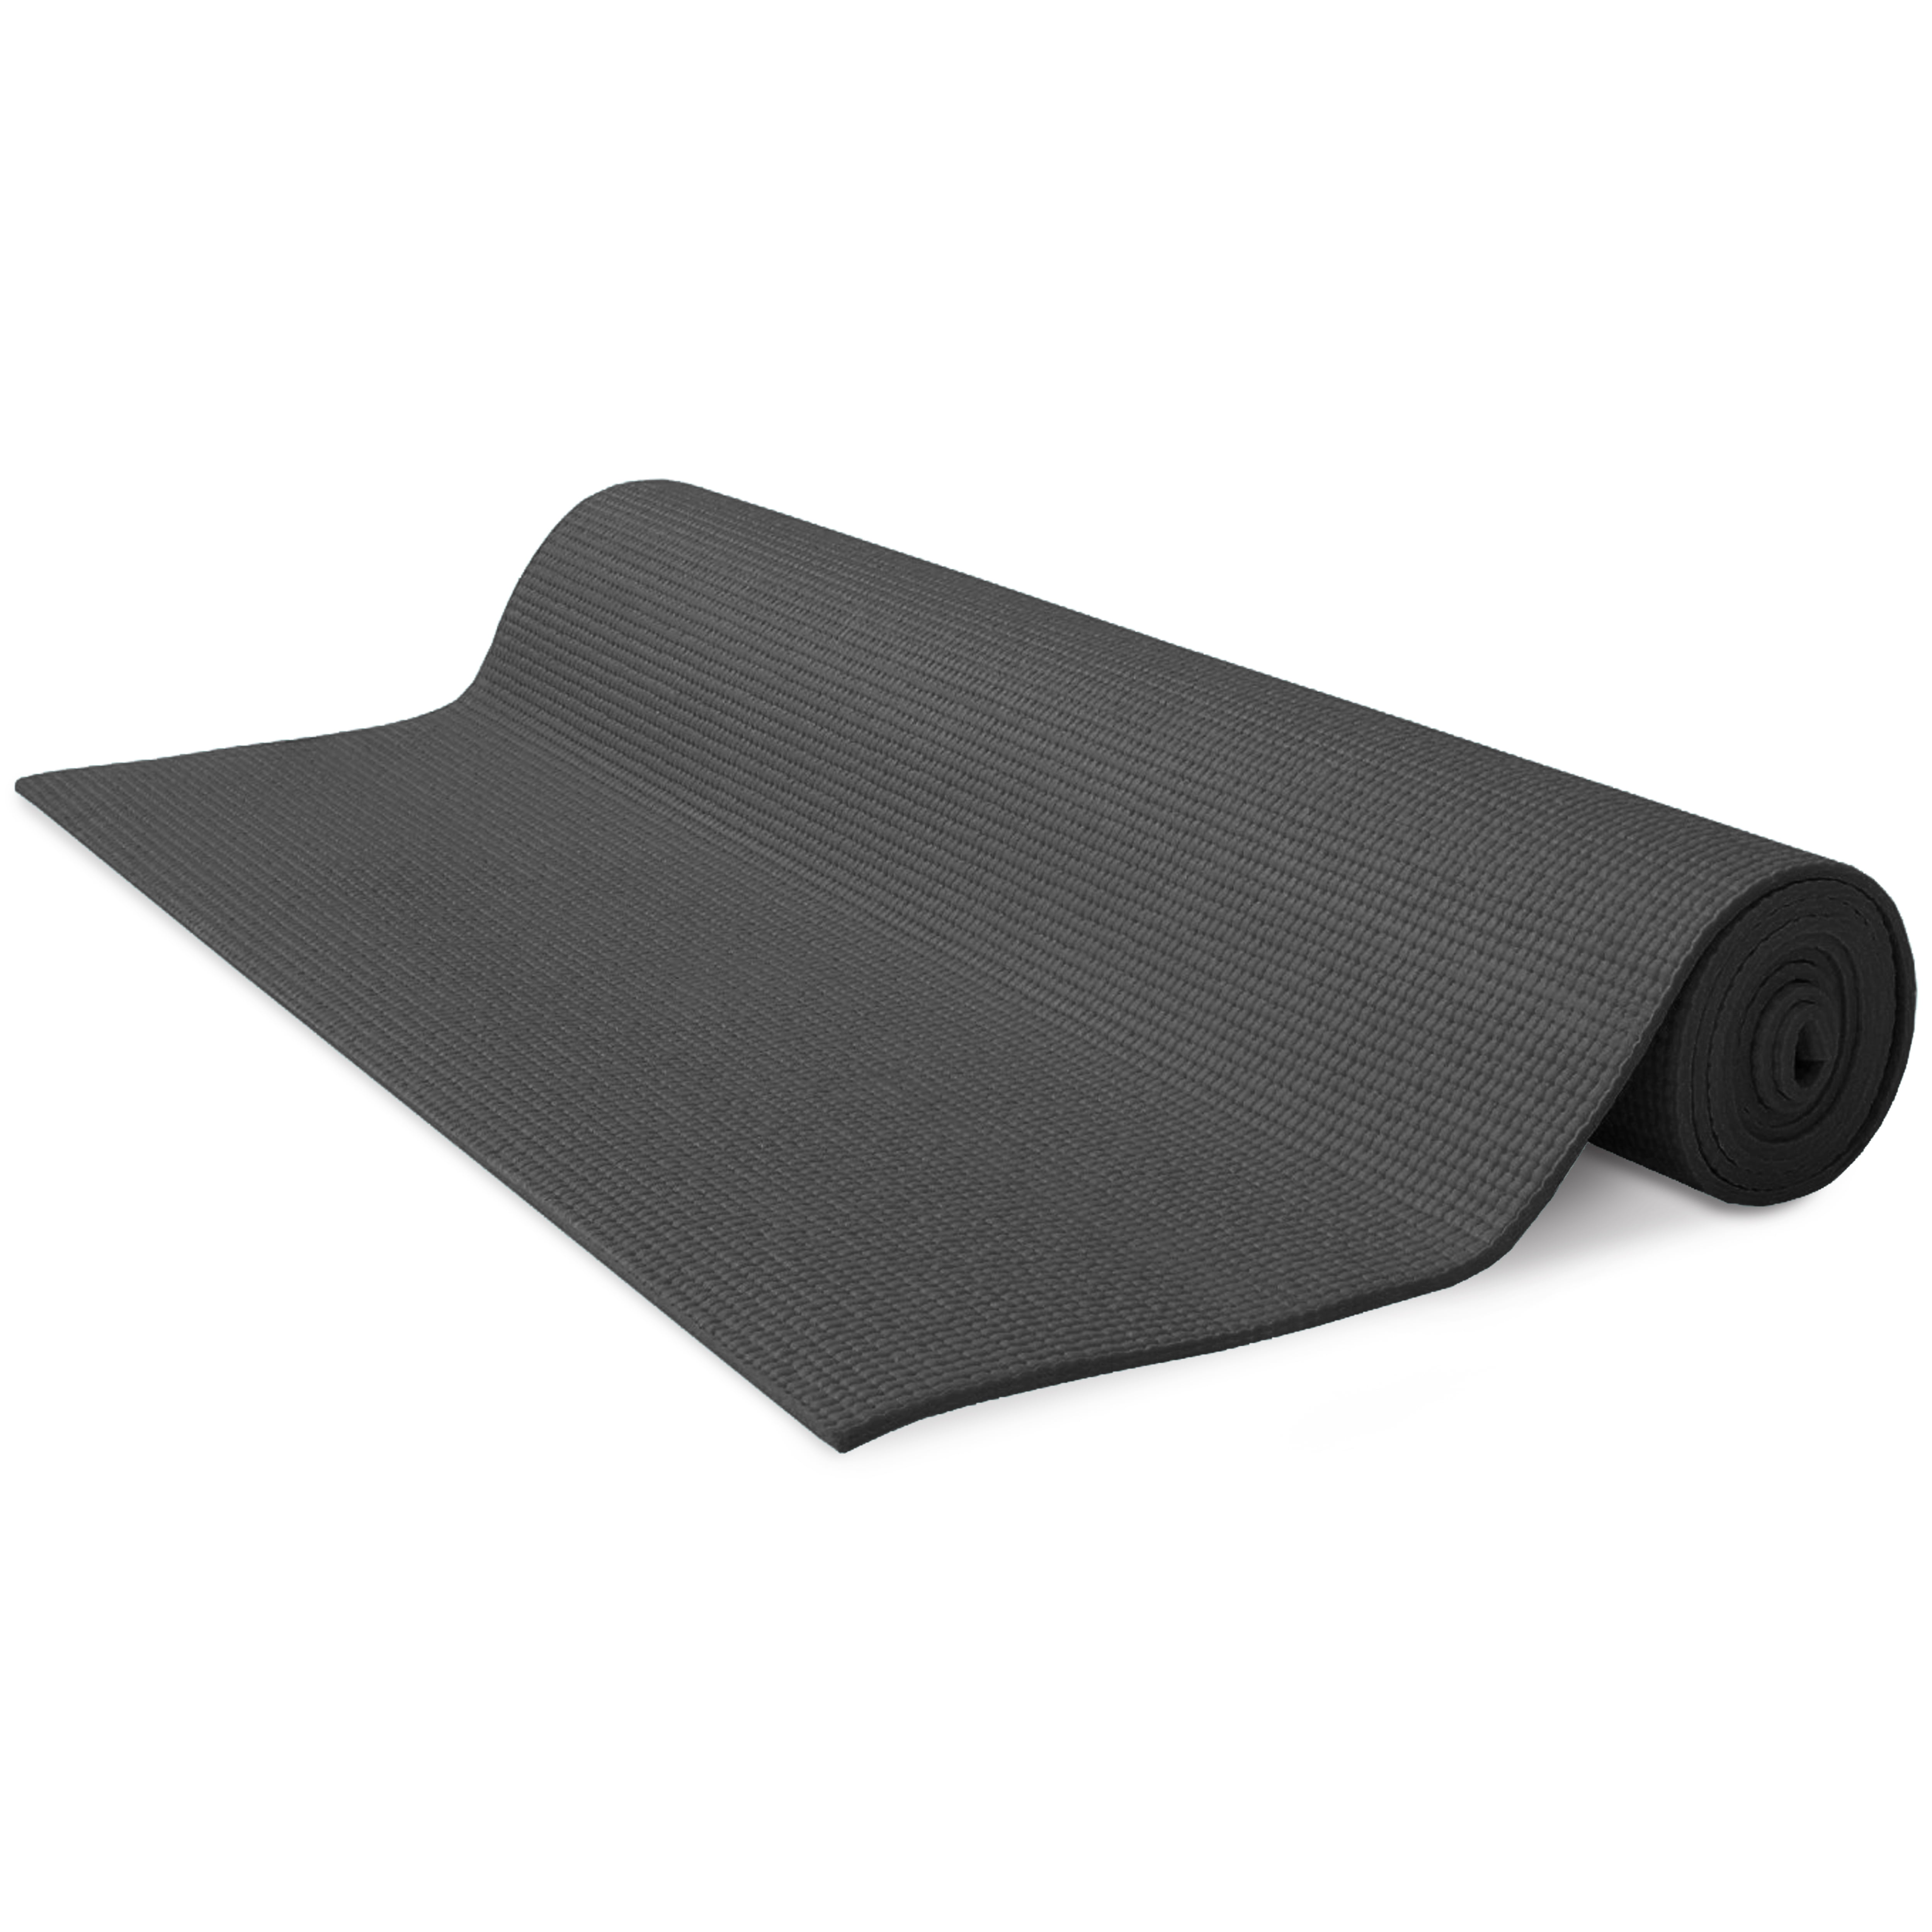 Bean Products Kids Size Sticky Yoga Mat - Thickness 3mm, 60”L x 24”W -  Non-Toxic, Non-Skid, Twilight